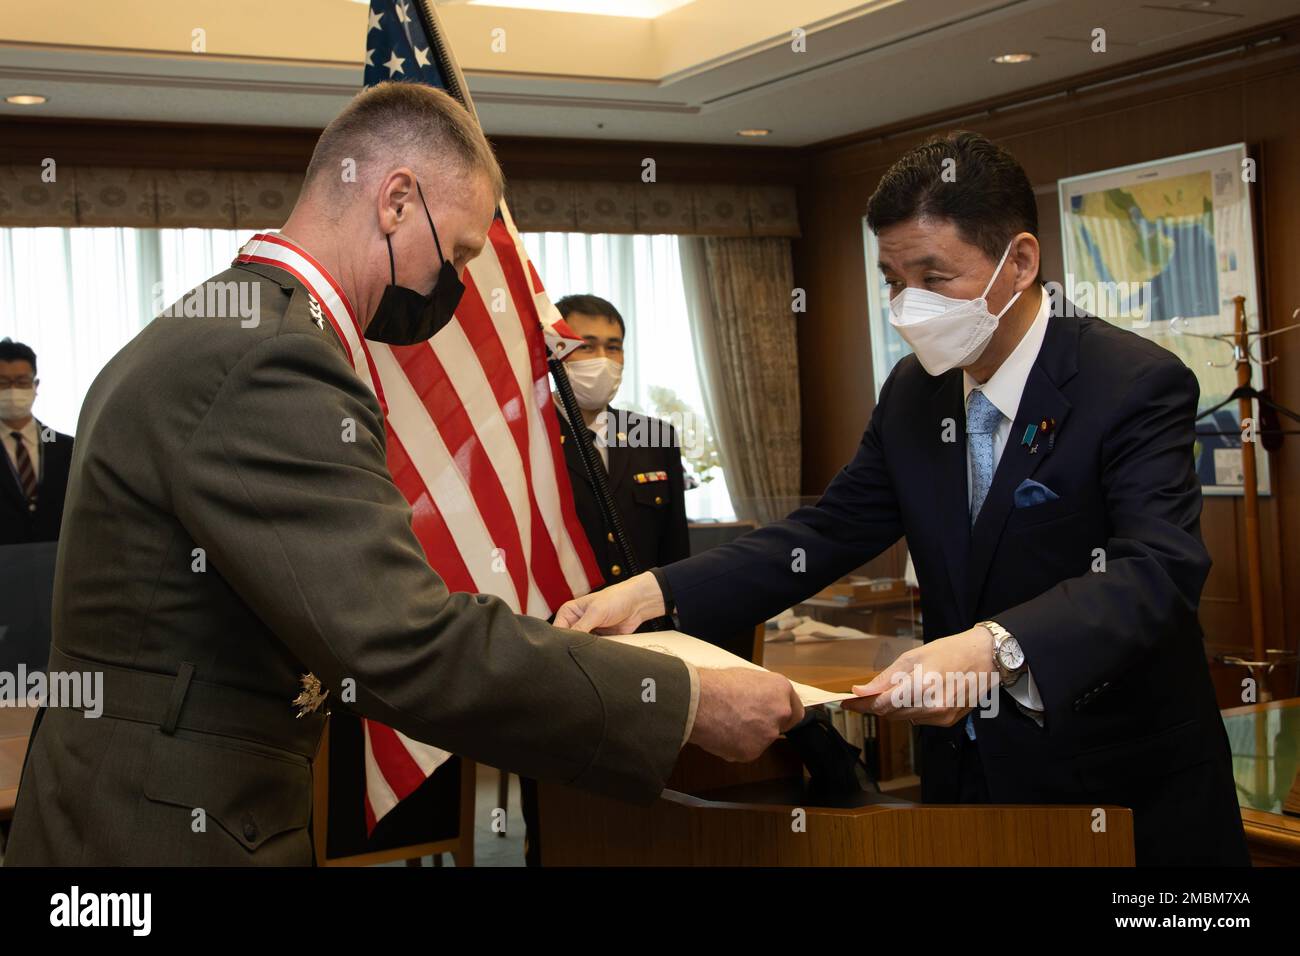 U.S. Marine Corps Lt. Gen. Steven R. Rudder, left, commander, U.S. Marine Corps Forces, Pacific, is awarded the Order of the Rising by the Japan Minister of Defense, Nubou Kishi after the Pacific Amphibious Leaders Symposium 2022, Tokyo, Japan, June 17, 2022. This iteration of PALS brought senior leaders of allied and partnered militaries together to discuss amphibious force readiness, expeditionary advanced base operations, intermediate force capabilities, and ways to improve interoperability between partners within the Indo-Pacific region. A total of 18 participating delegations from Asia, A Stock Photo